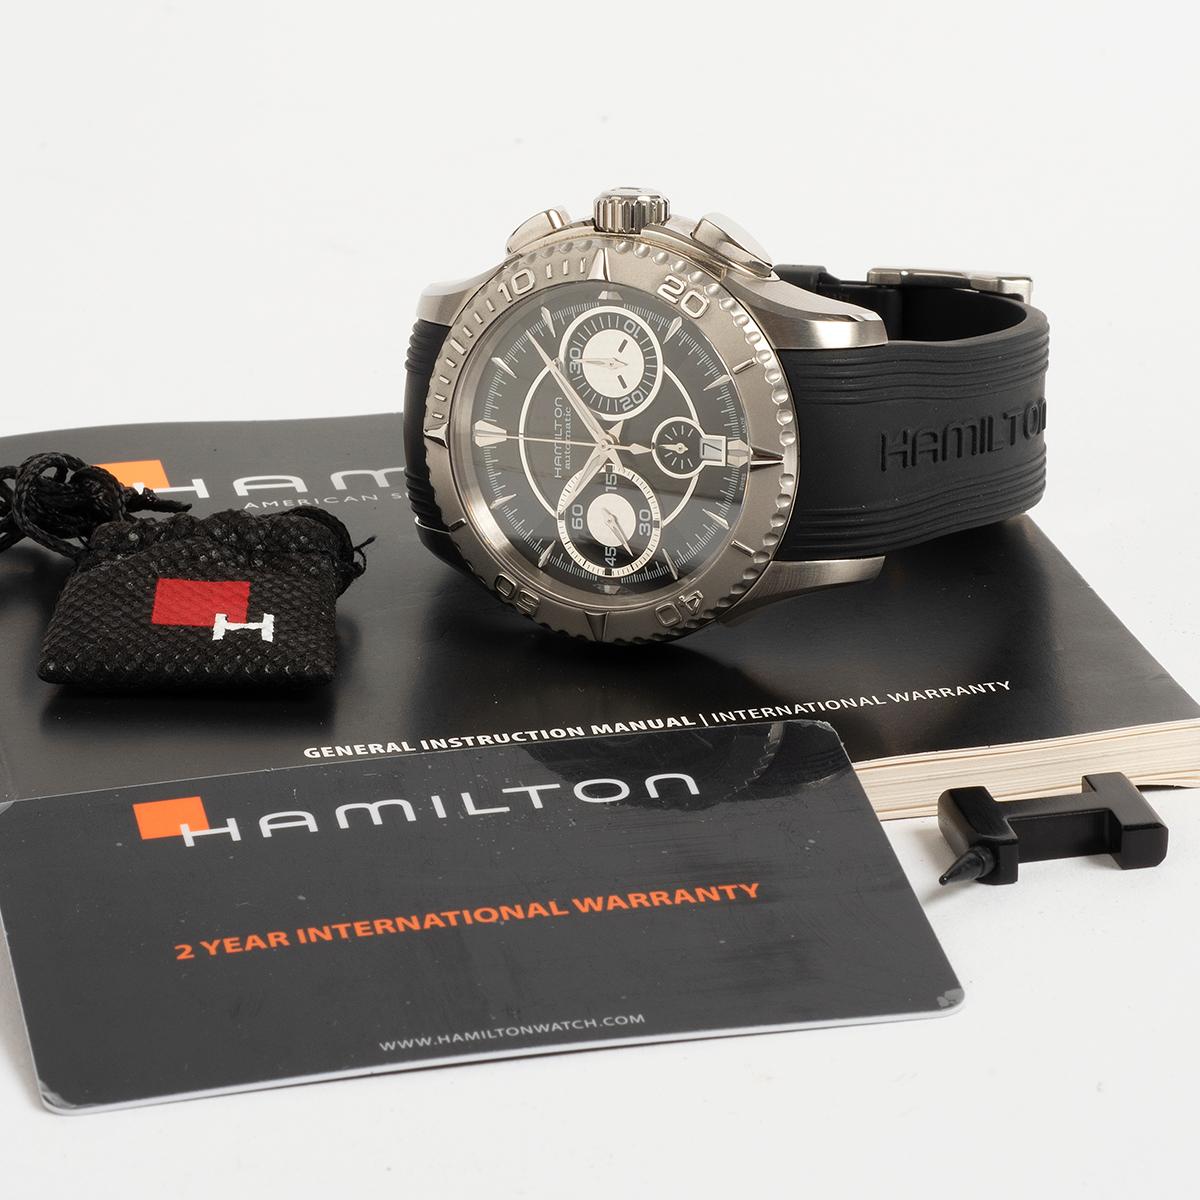 Our Hamilton Seaview Jazzmaster , reference H37616331 with automatic movement, features a 44mm stainless steel case with black and carbon fibre effect dial and has both chronograph and date functions as well as rotating bezel. Intended to blend the